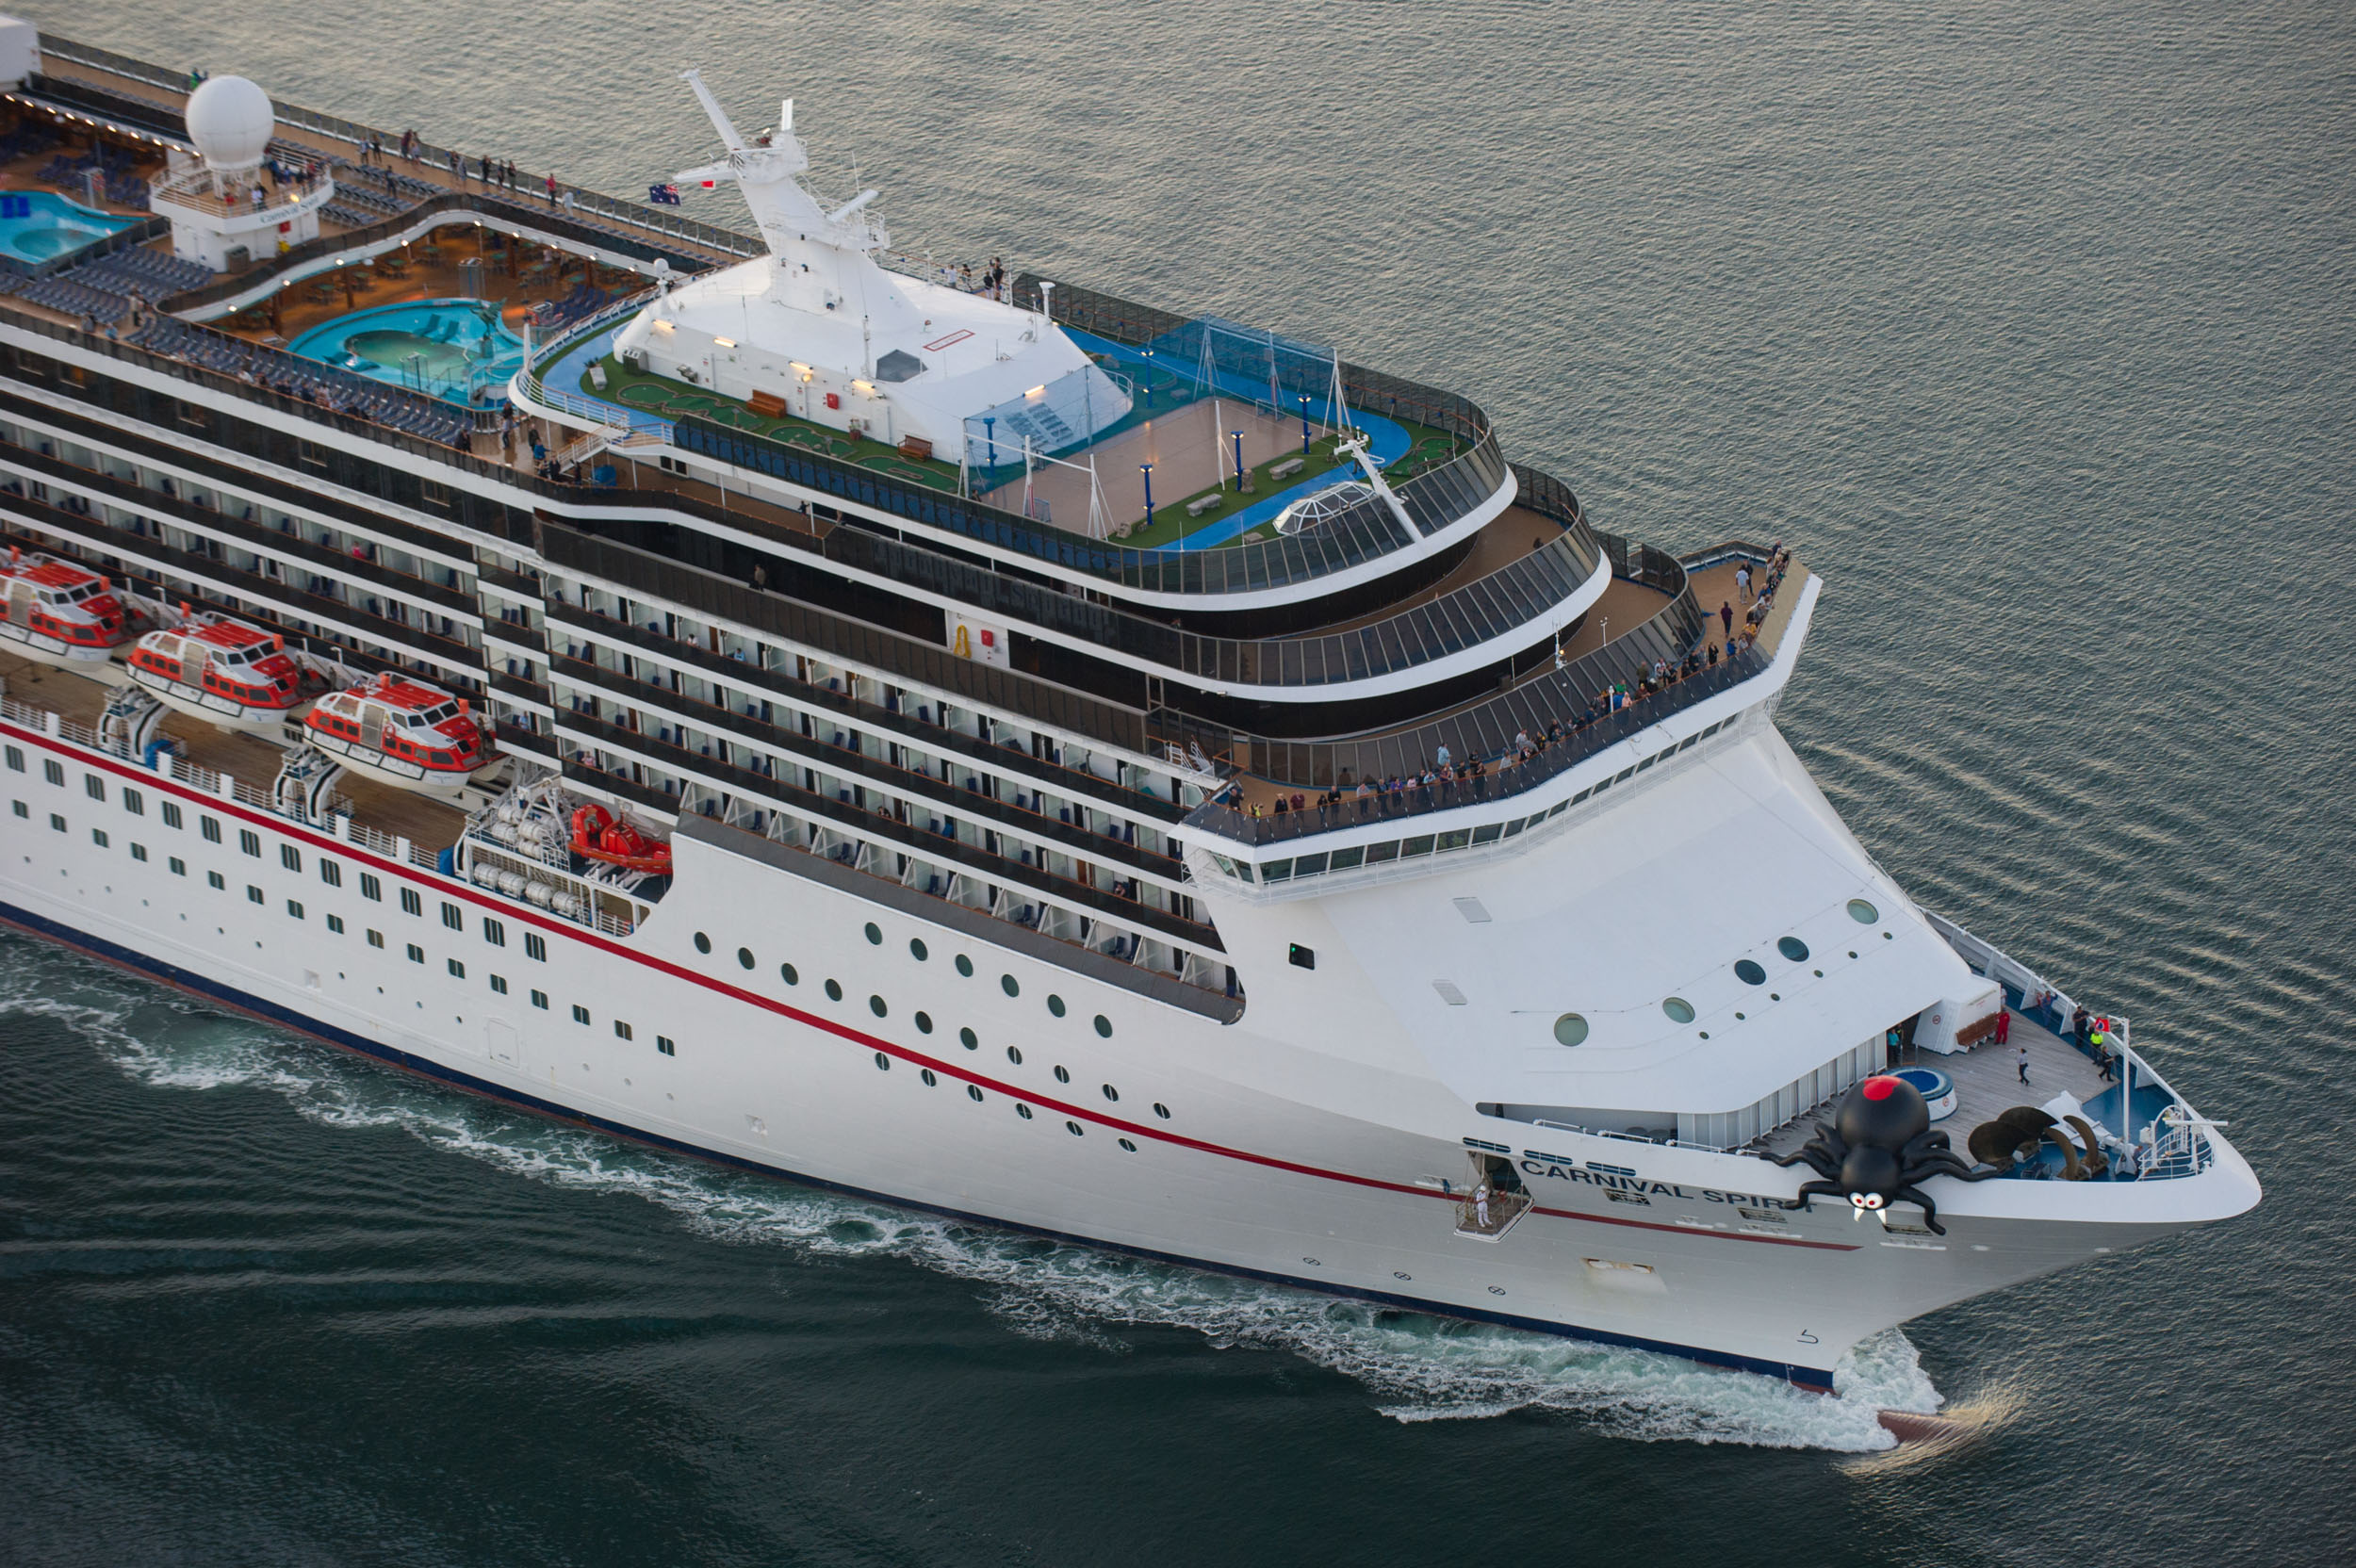 Carnival Spirit creeps into Sydney with a giant Redback 6